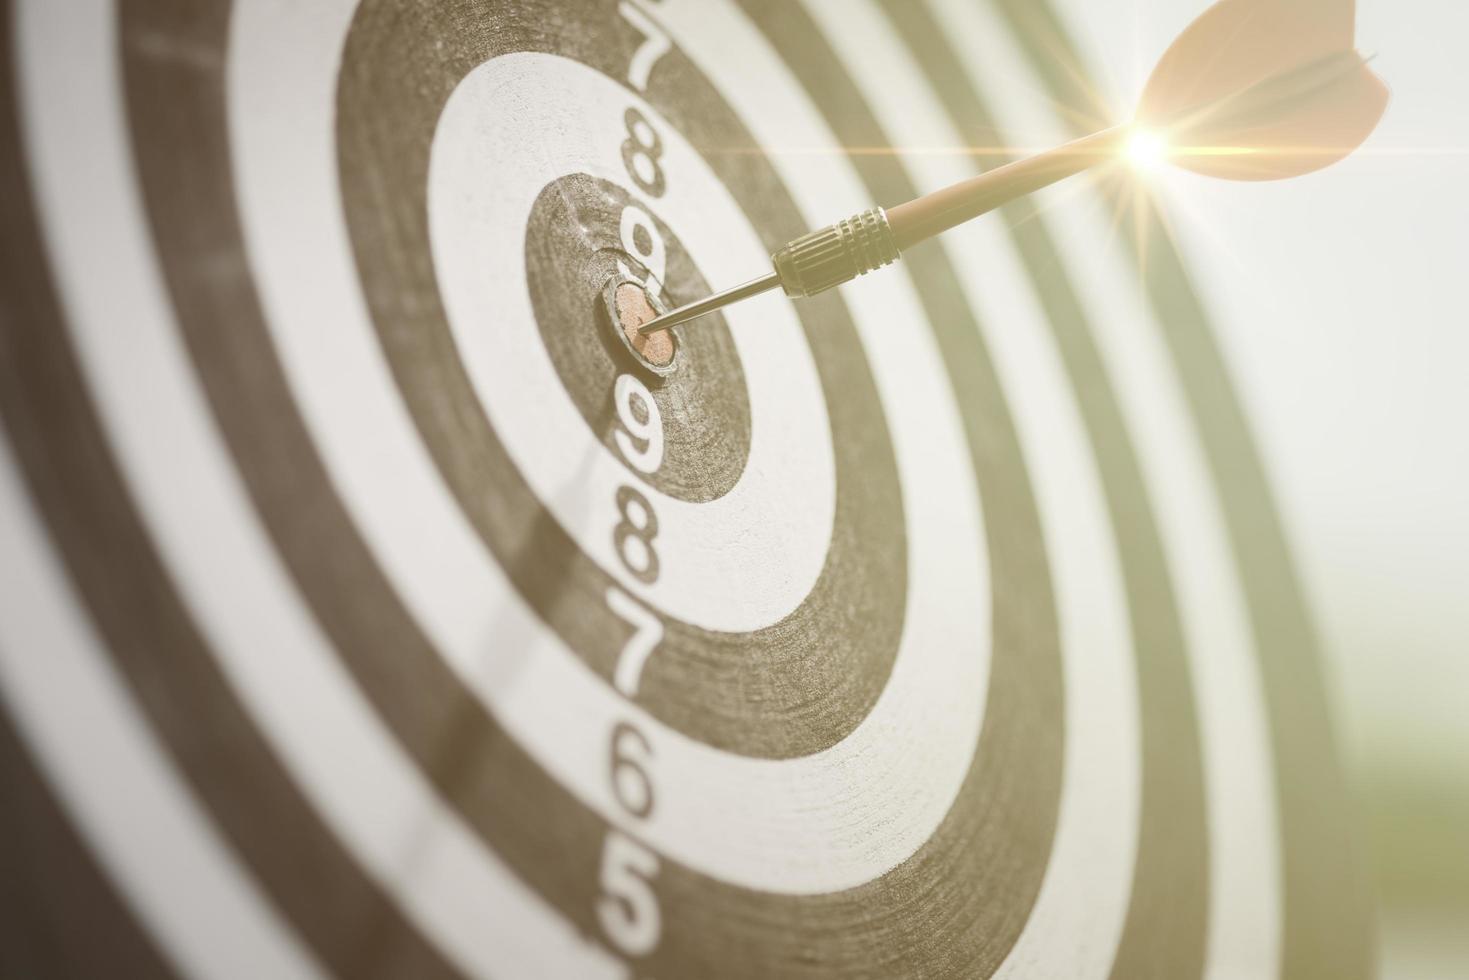 dart arrow hitting in the target center of dartboard, setting business goals, formulating success strategies and goals, planning and managing the future for business growth. photo